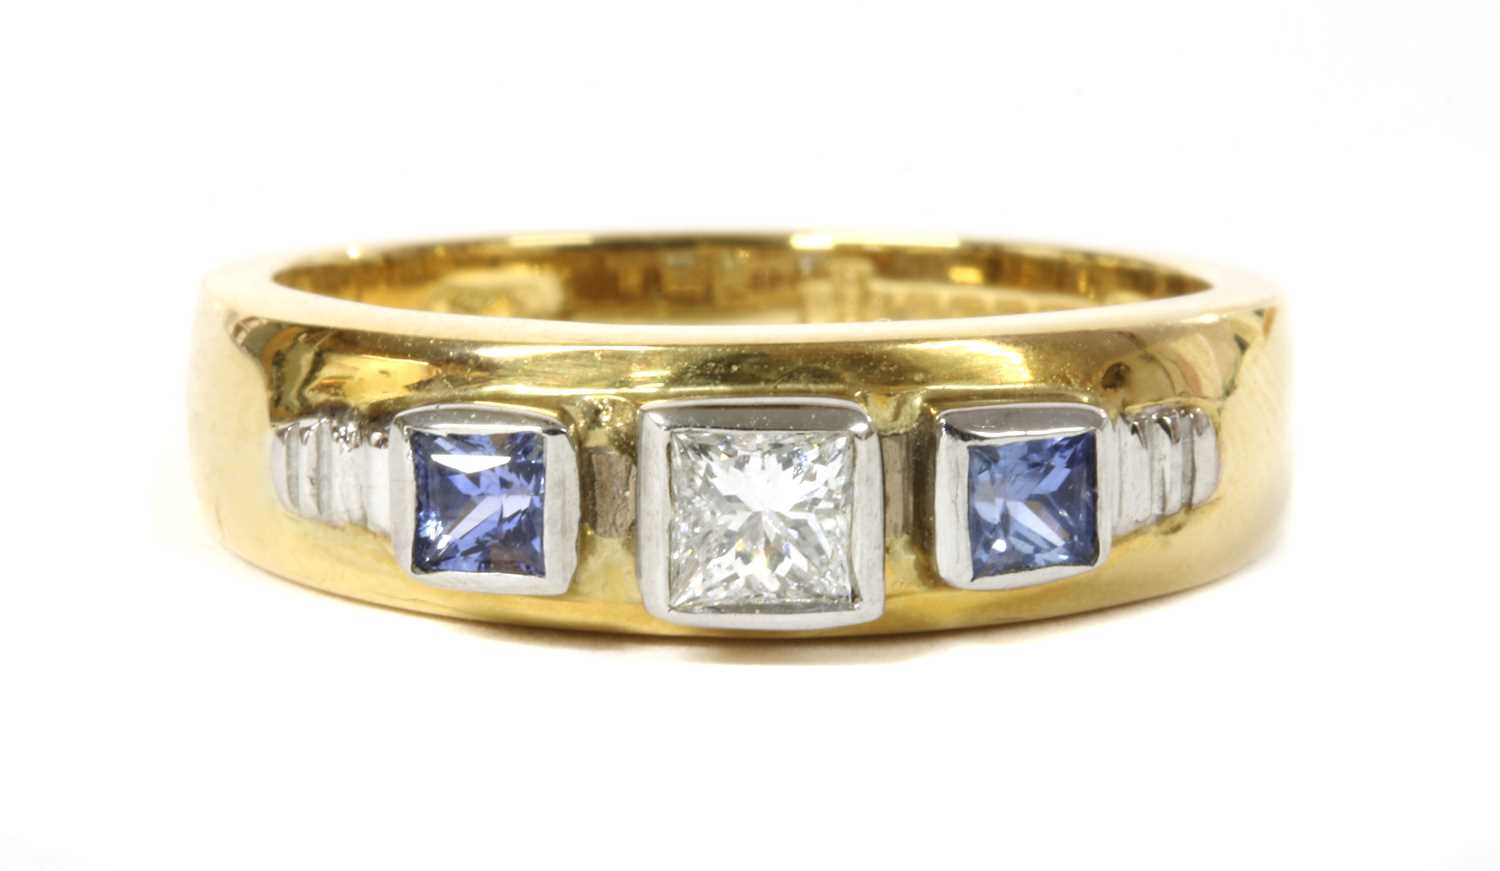 Lot 171 - An 18ct gold diamond and tanzanite ring, by Clogau